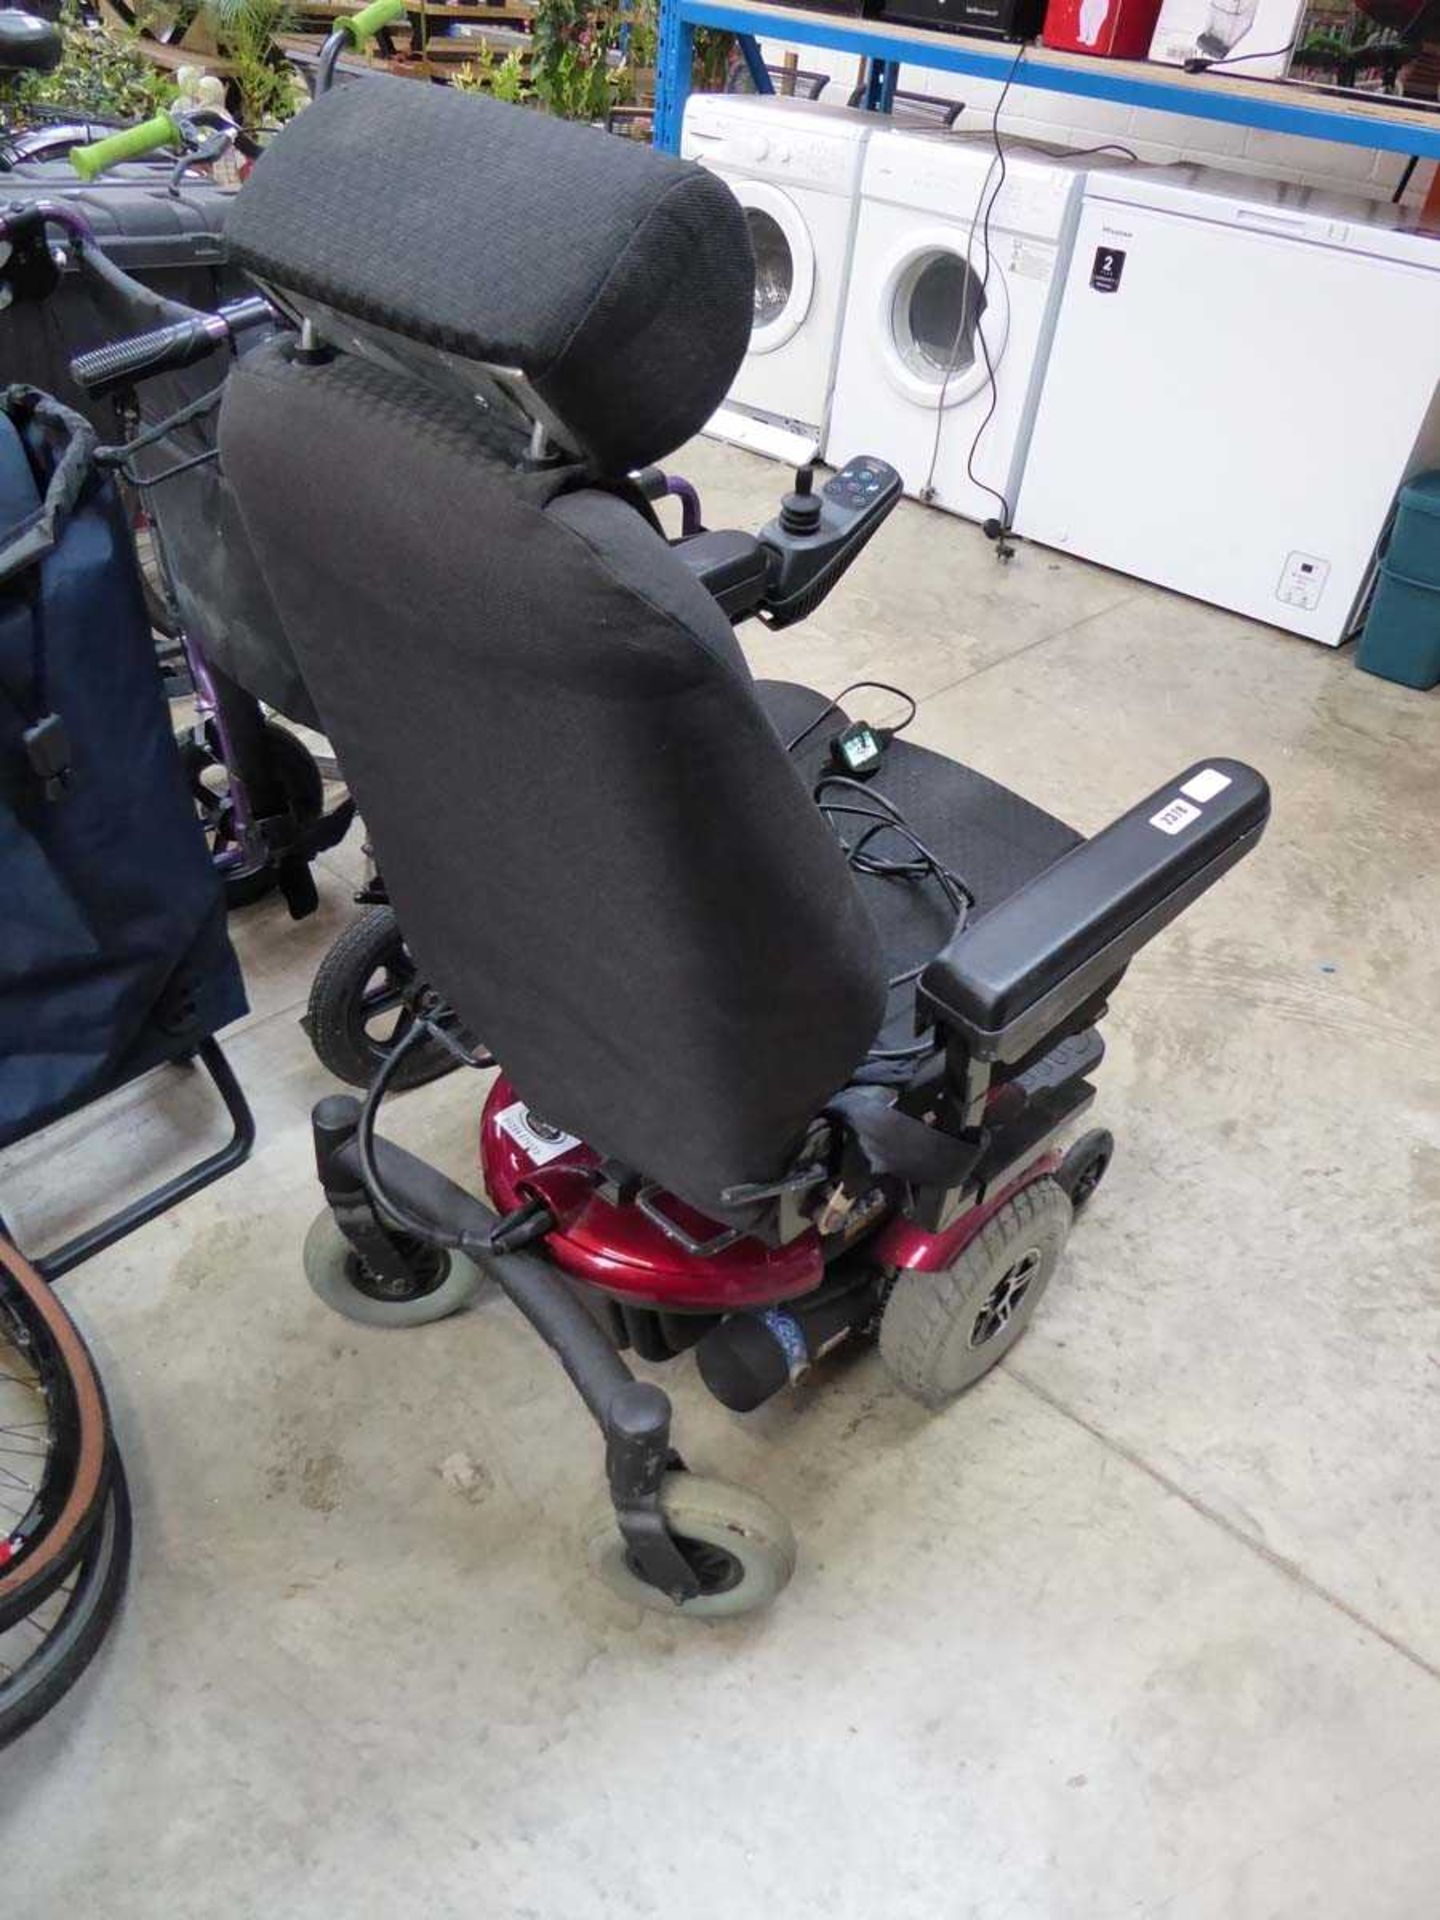 Jet 3 Ultra battery operated disability chair with charger - Image 2 of 4